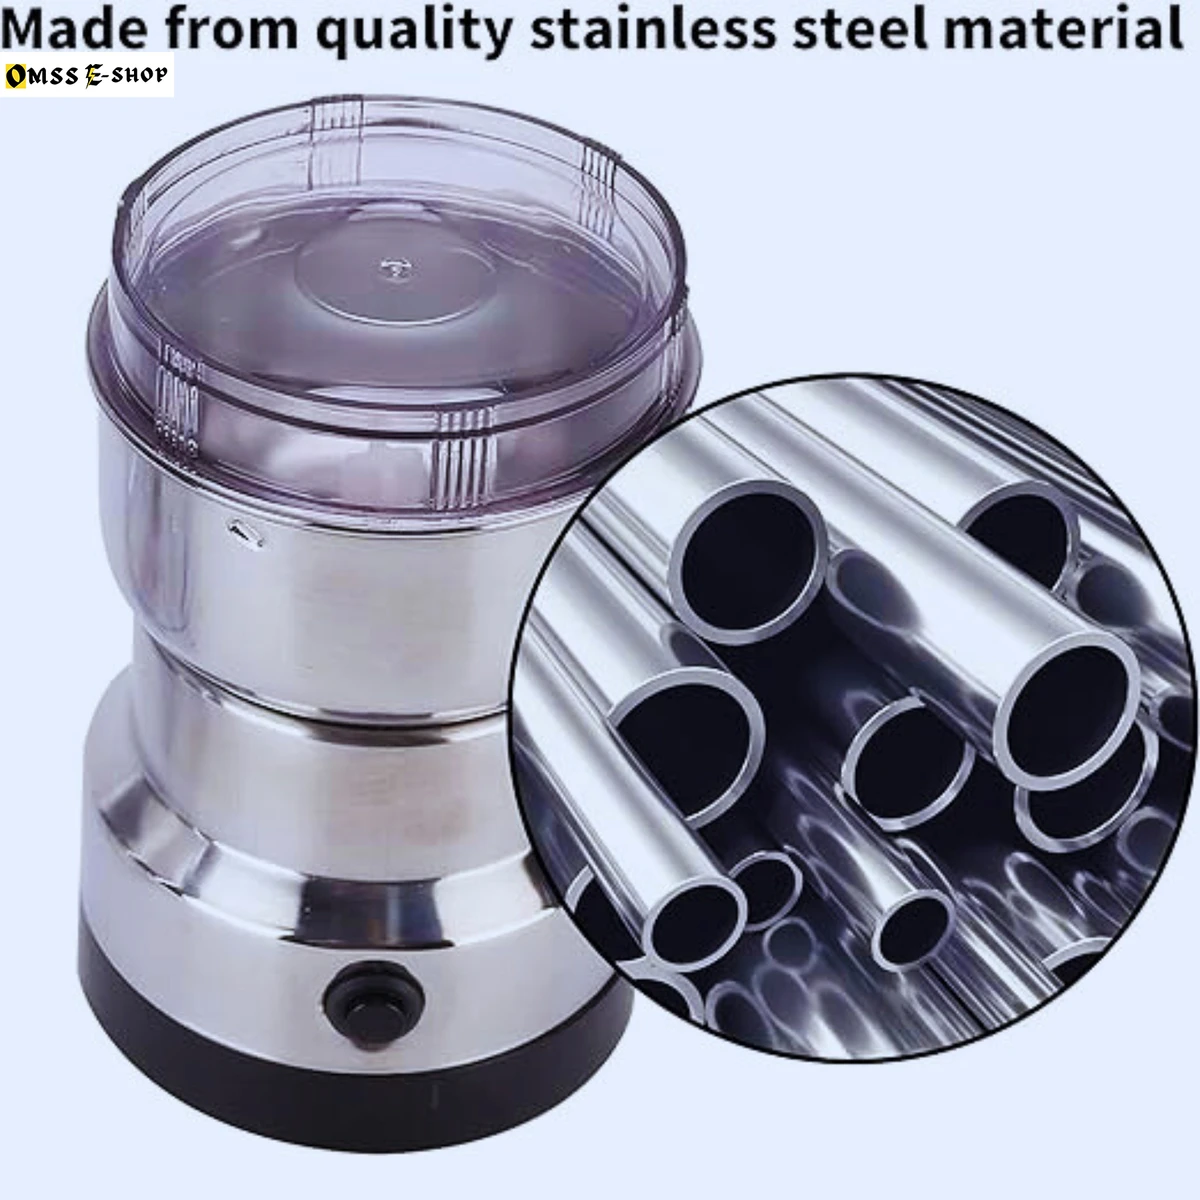 2-In-1 Nima Electric Grain Grinder and Juicer Stainless Steel Electric Spice Grinder, Corrosion Resistant Seed Herb Grinder, Mill Blender Kitchen Tool for Home